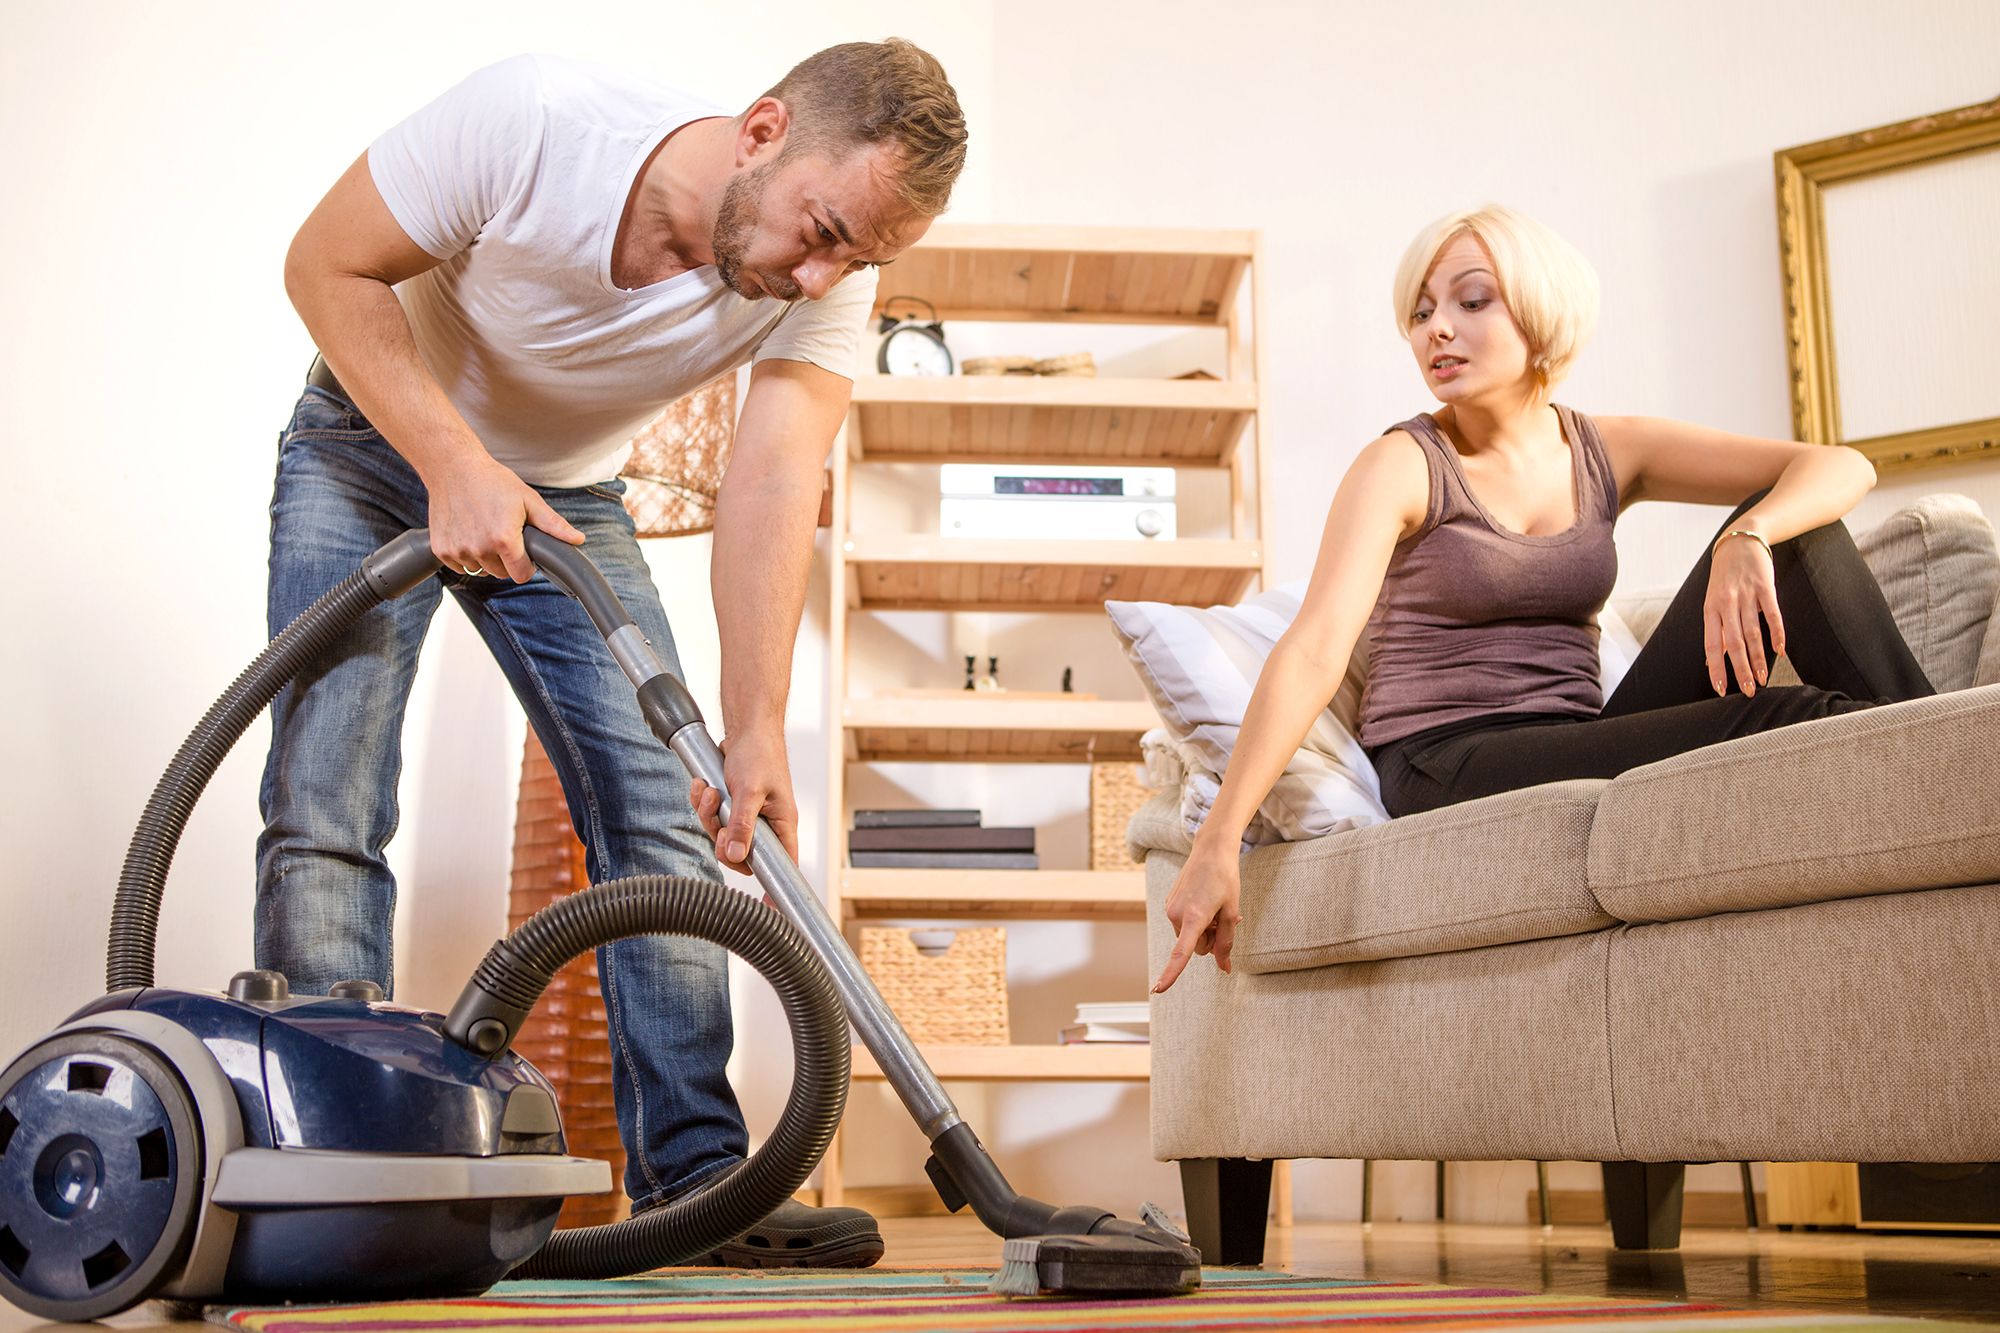 Woman Revealed How She Makes Her Husband Do More House Chores And